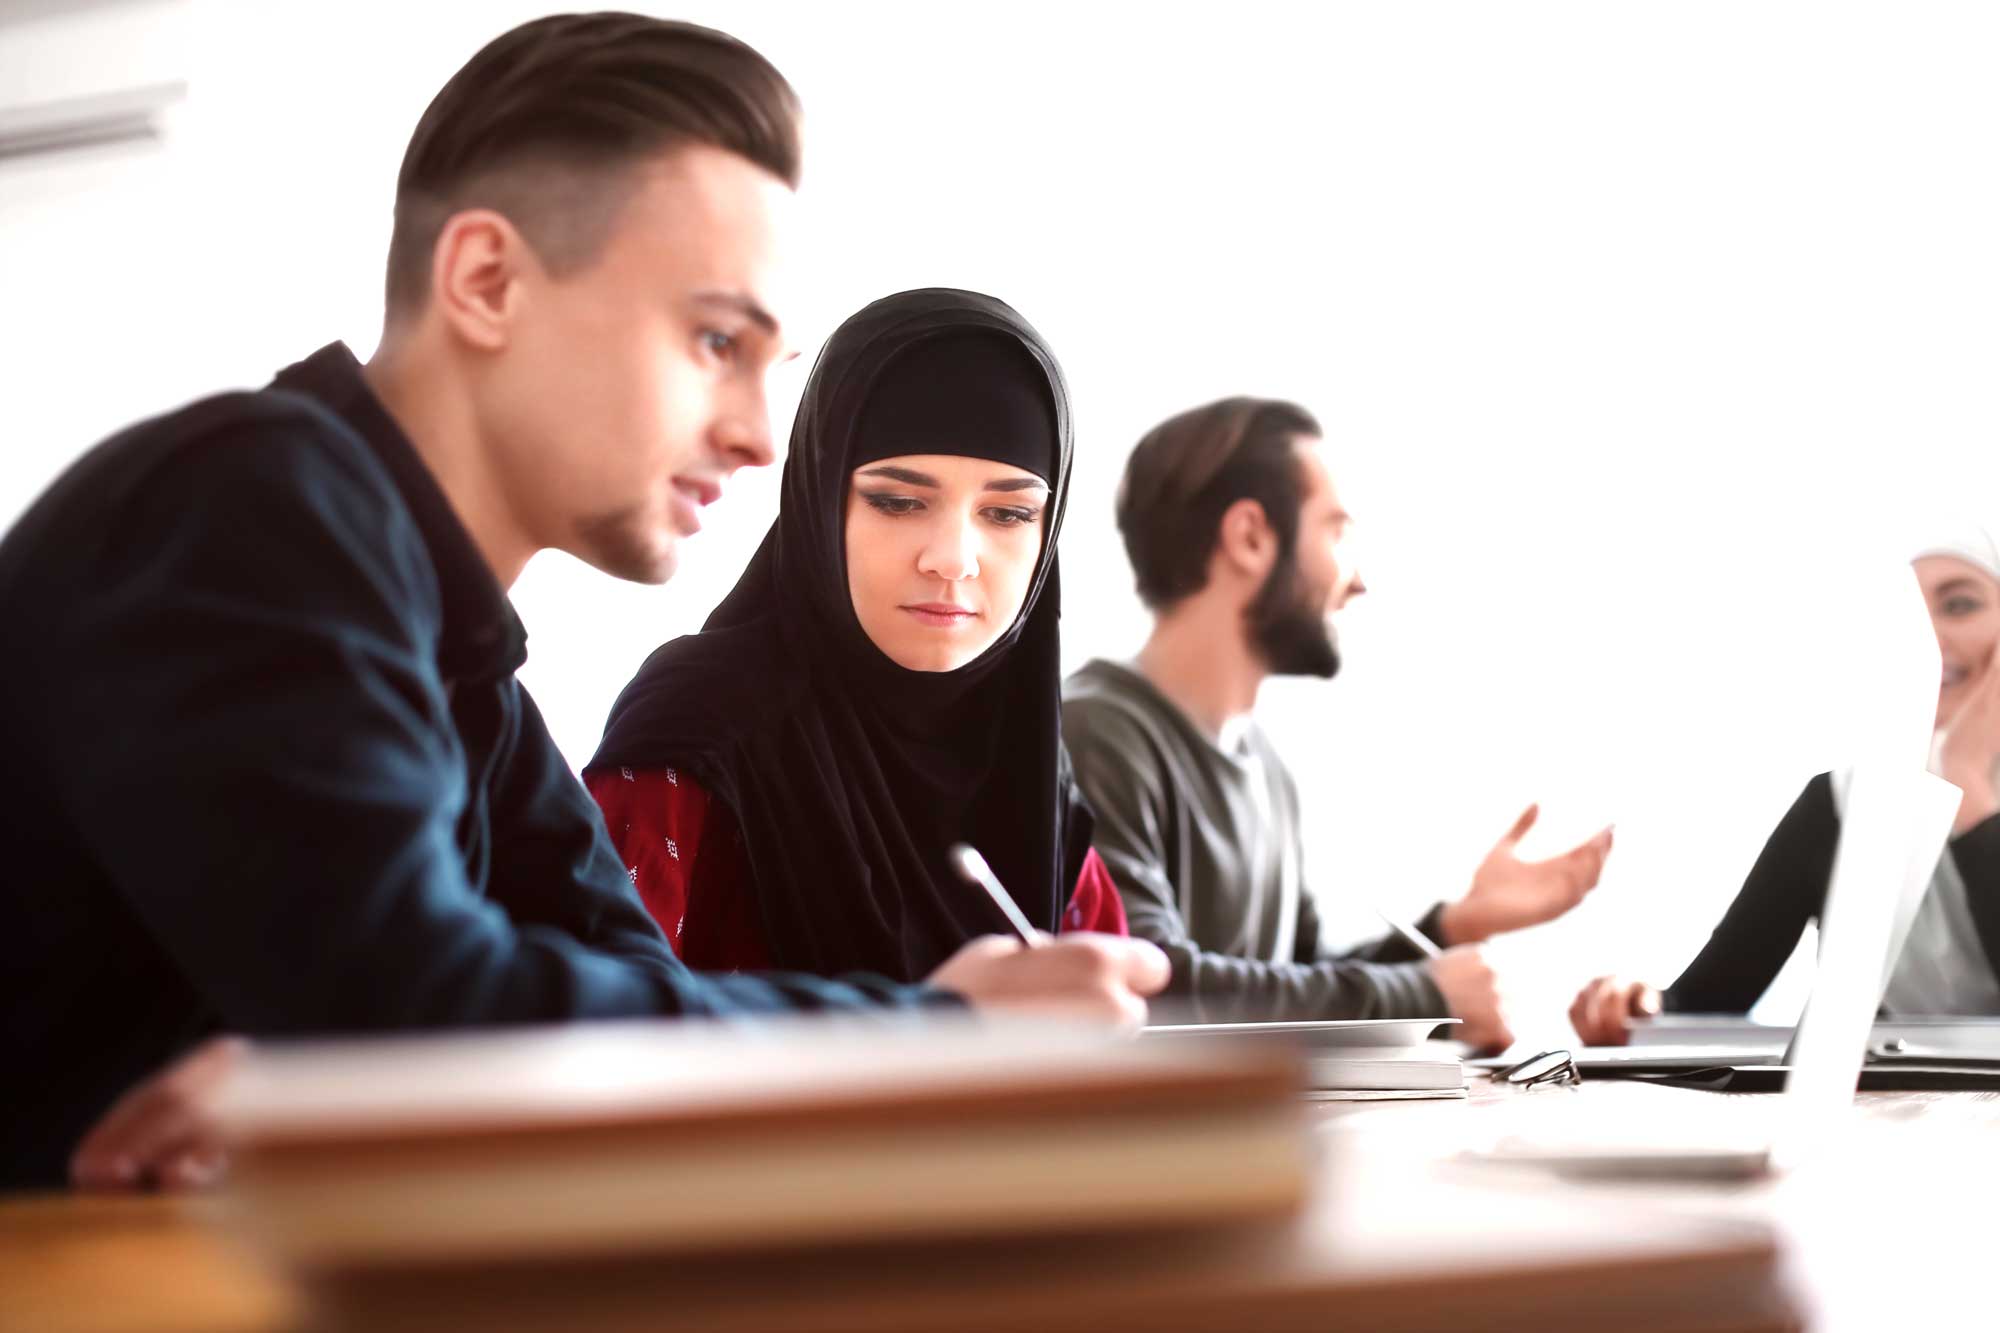 7 Tips for Muslim Students on Campus